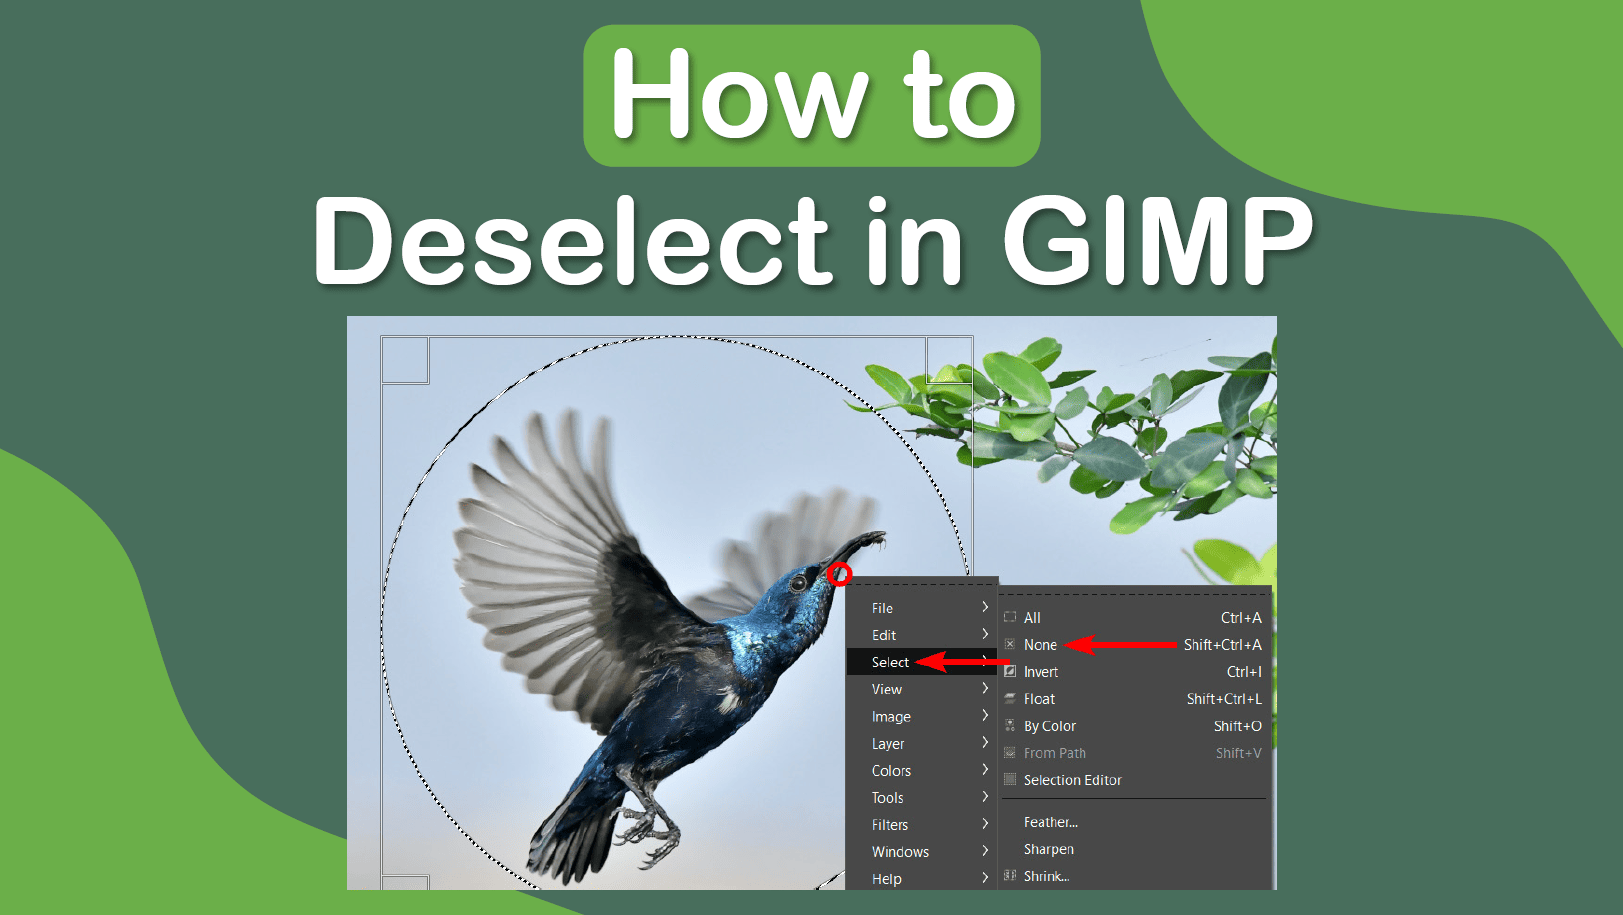 How to Undo in GIMP (Keyboard Shortcut + Insider Tips)